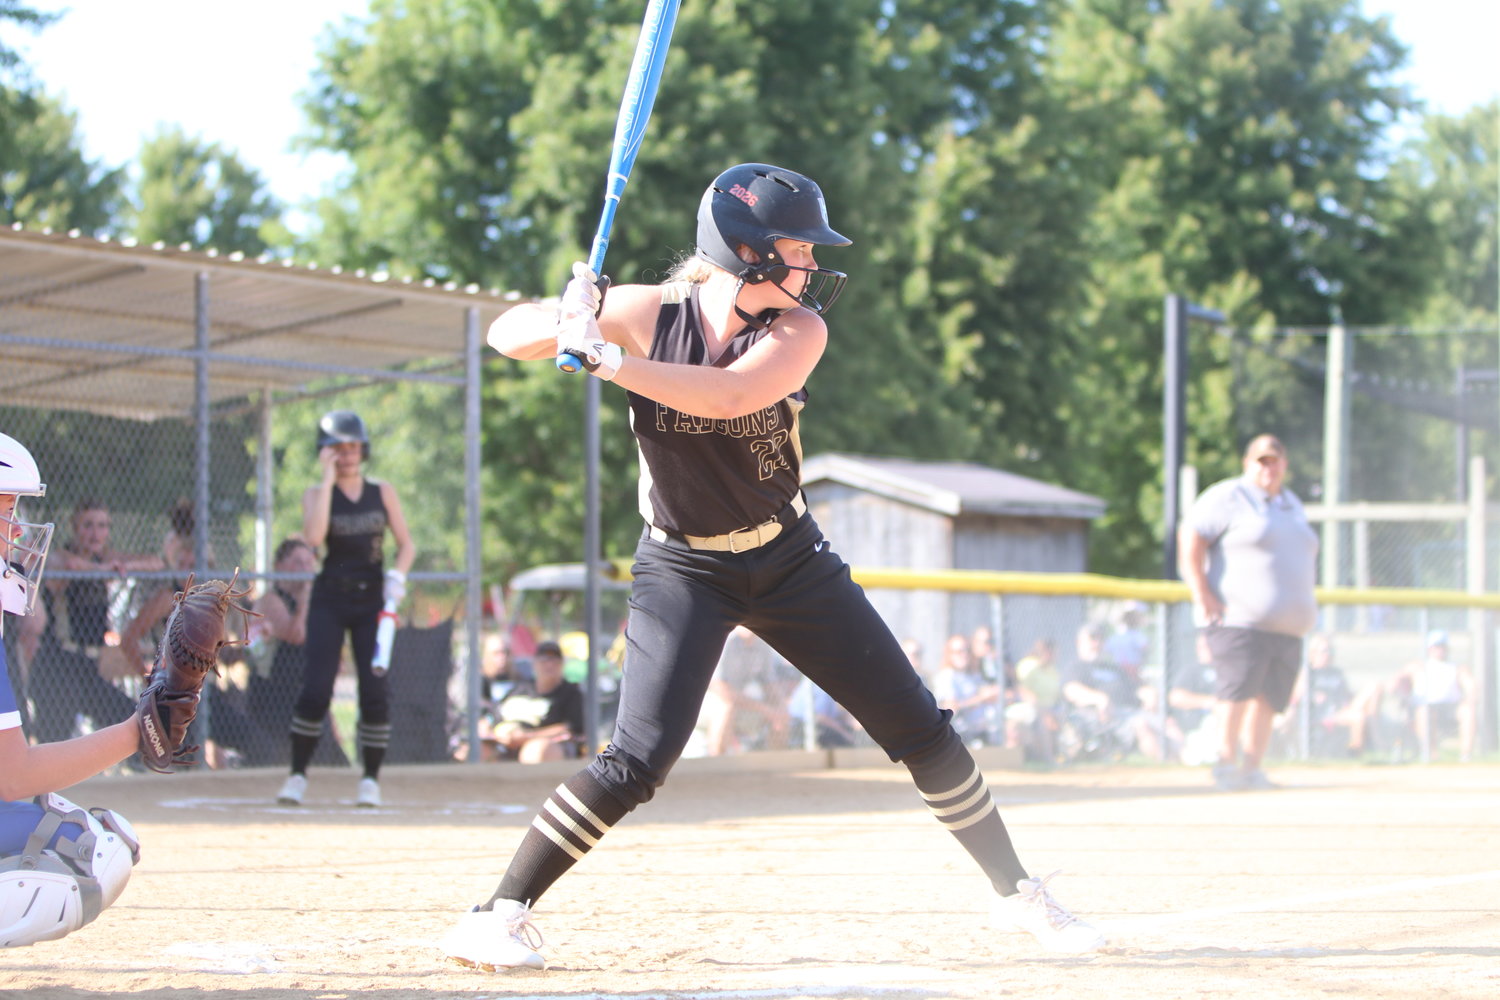 Fayette freshman Leah Thies smashed two home runs over the fence during the Falcons’ rout over Harrisburg on Thursday.